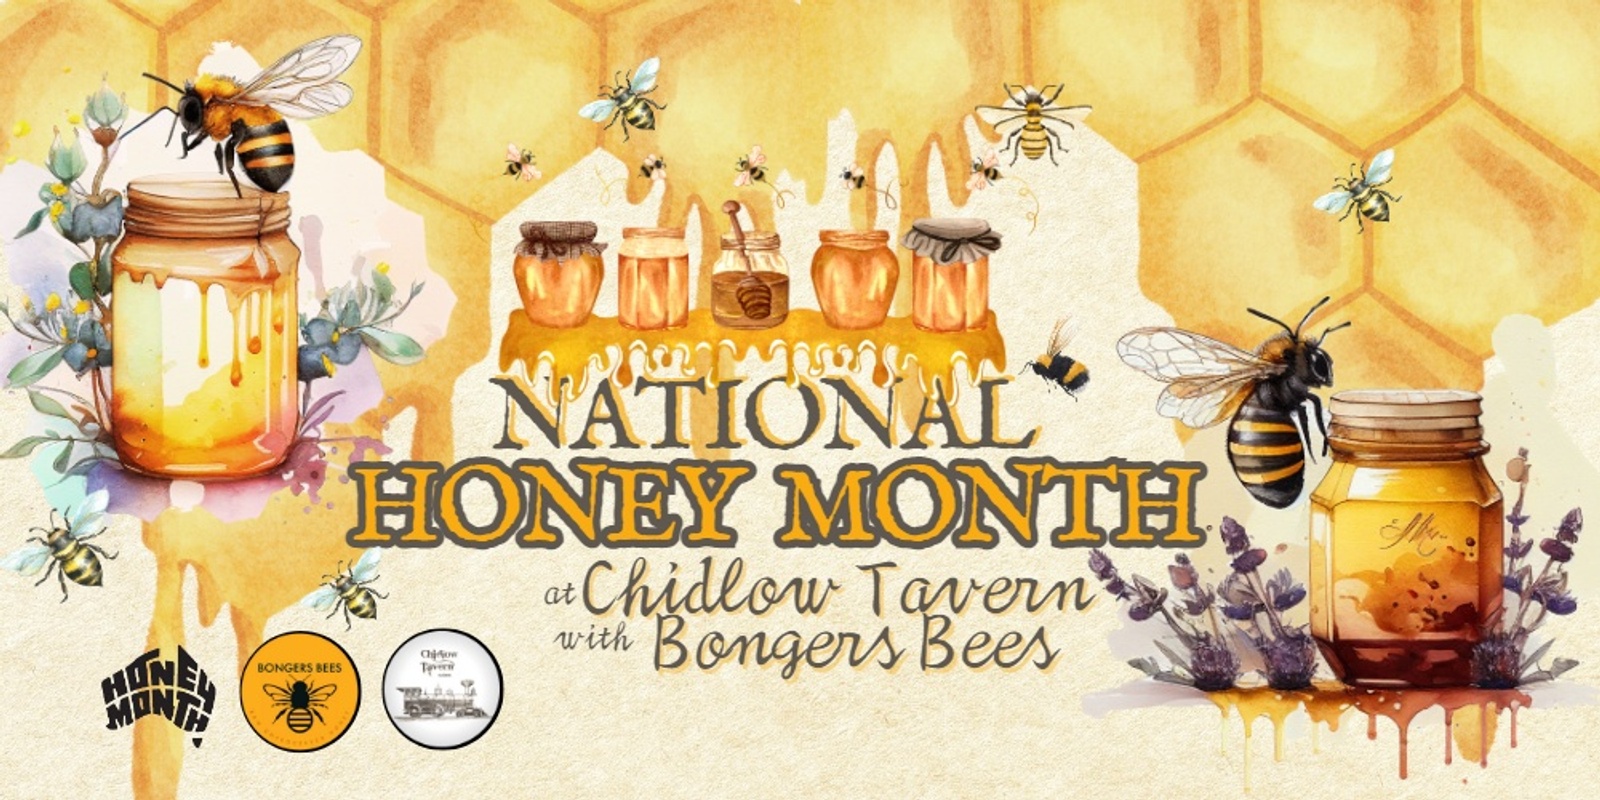 Banner image for National Honey Month at Chidlow Tavern with Bongers Bees